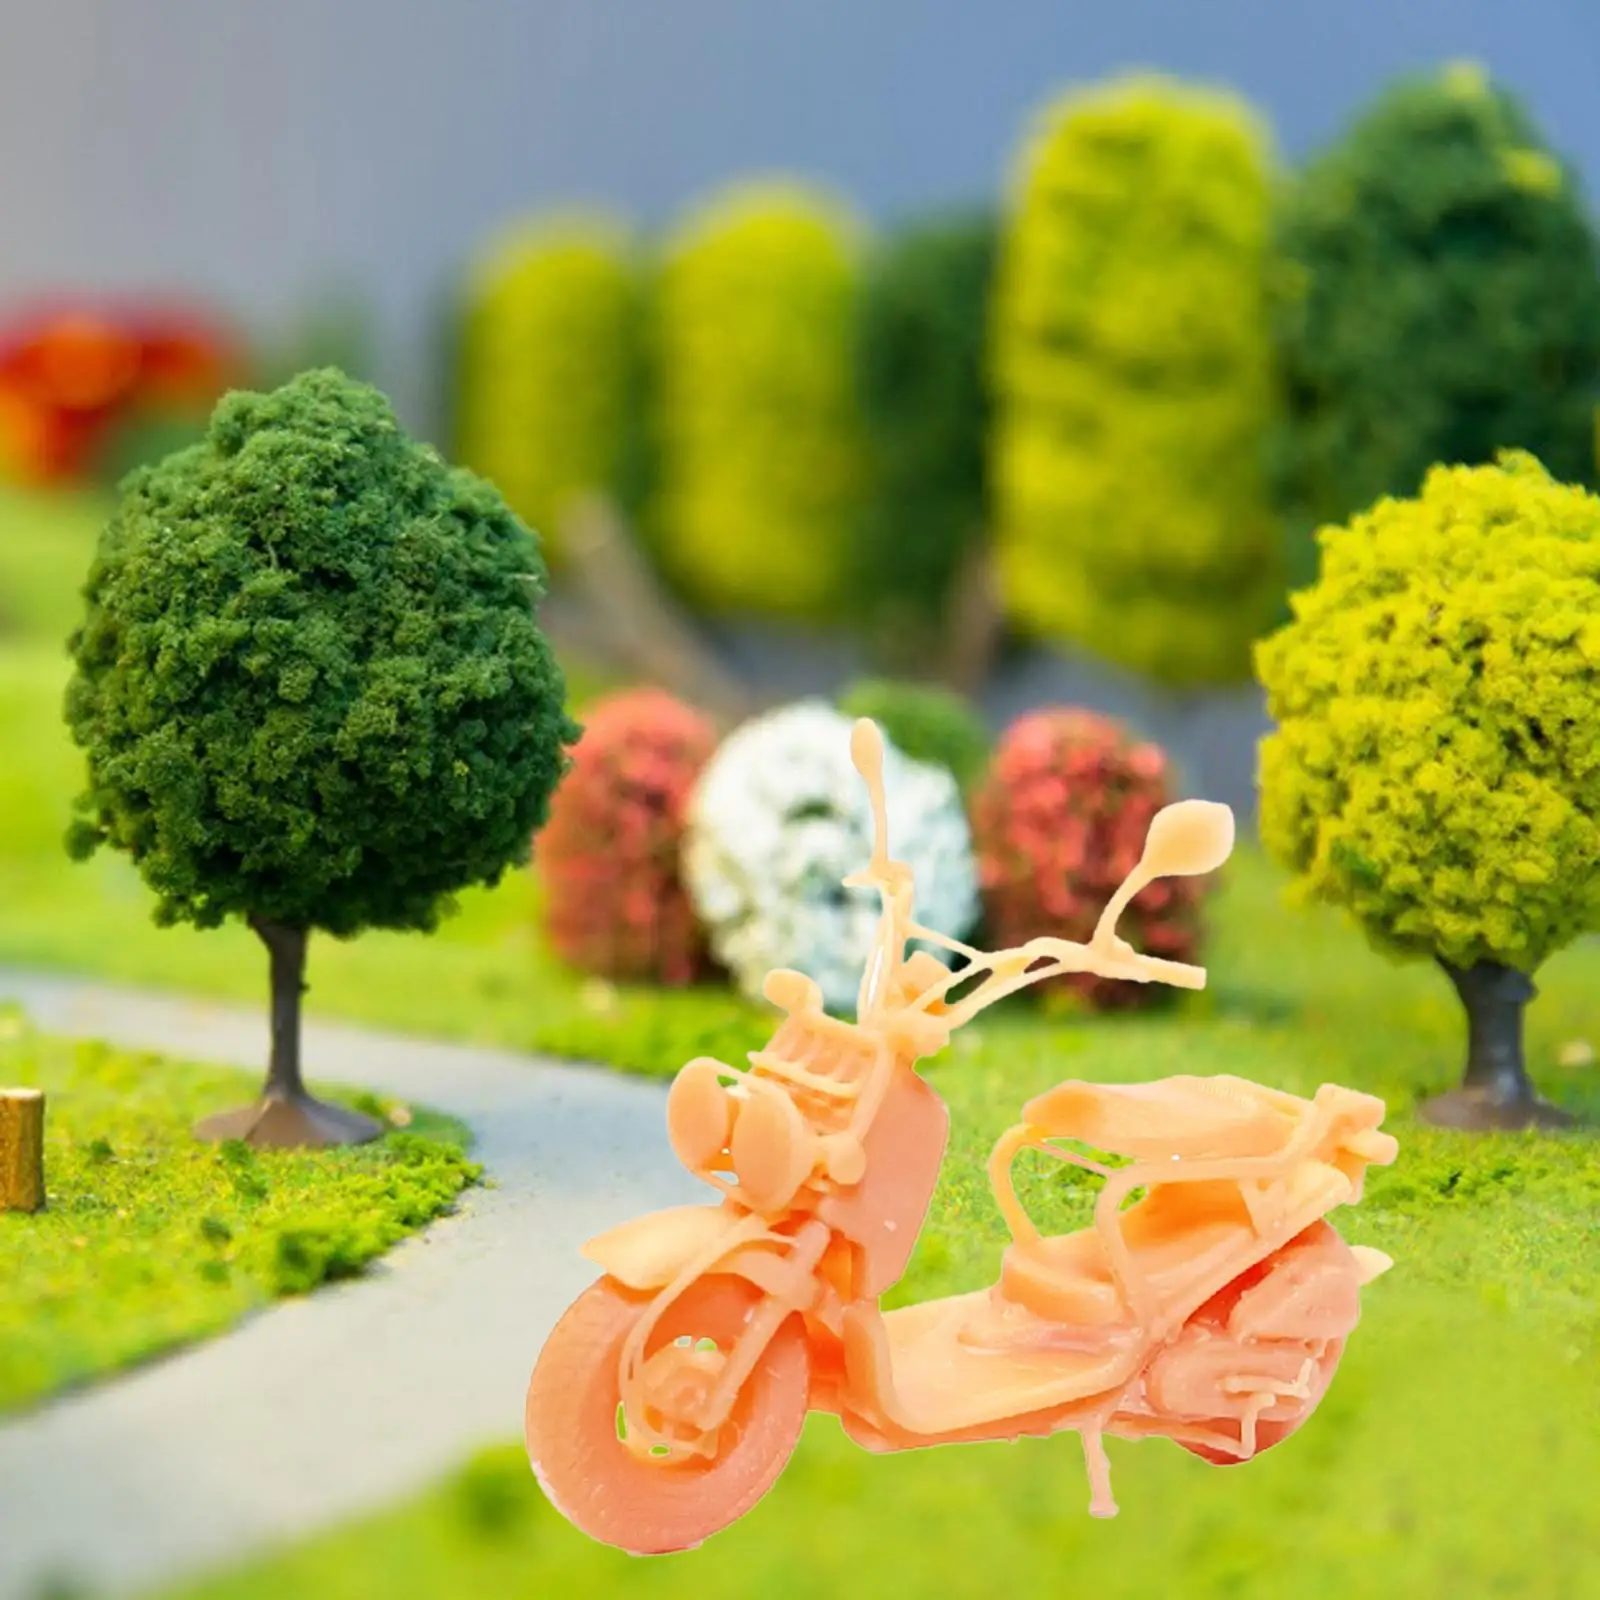 1/64 Miniature Motorcycle Model Collectibles Sand Table Ornament Diorama Motorcycle Toys for Micro Landscapes Decoration Layout